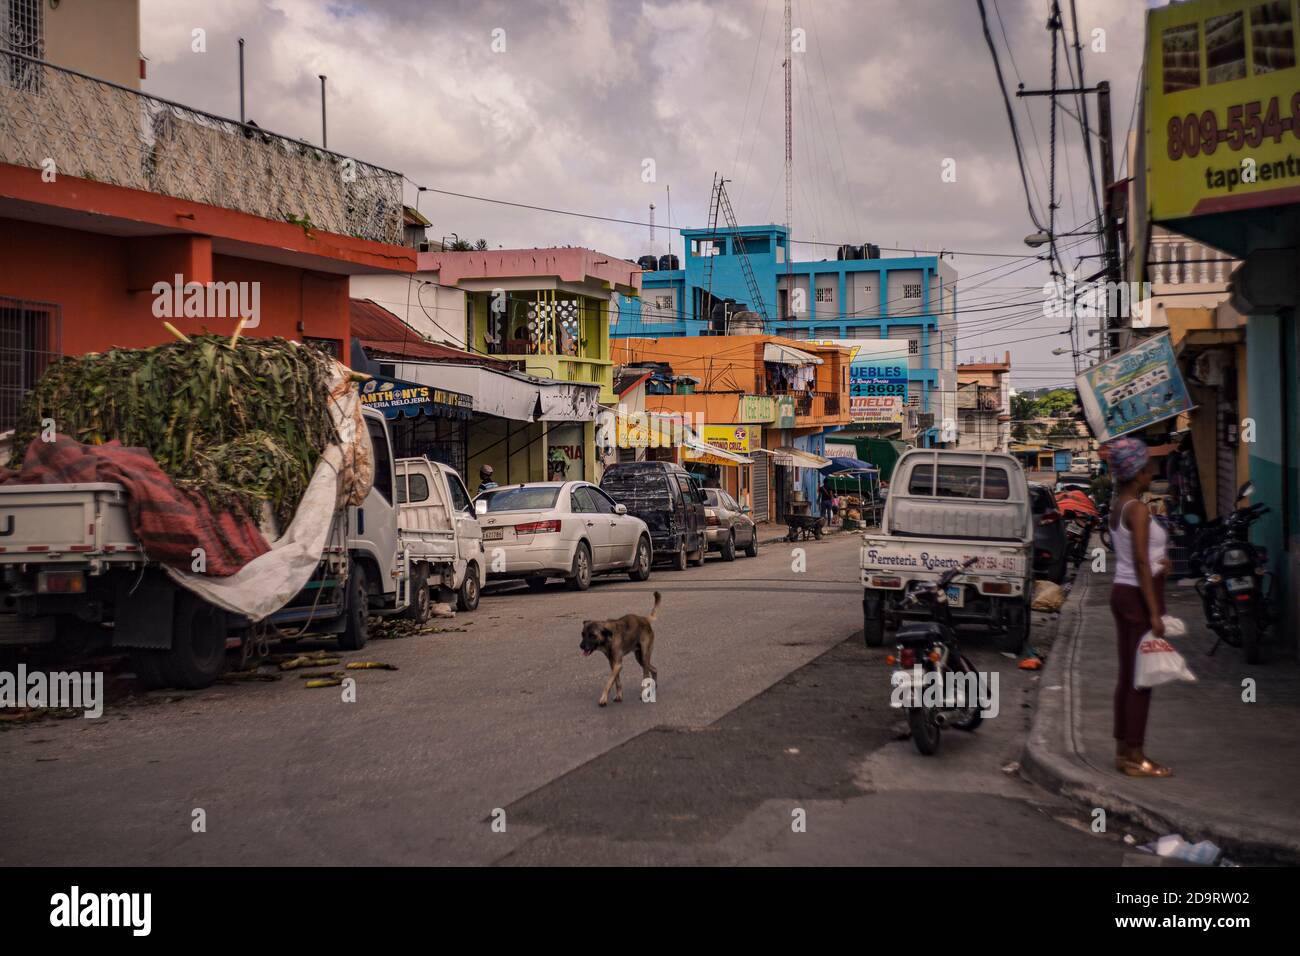 HIGUEY, DOMINICAN REPUBLIC 12 JANUARY 2020: Daily life scene in the streets of Higuey in the Dominican Republic Stock Photo